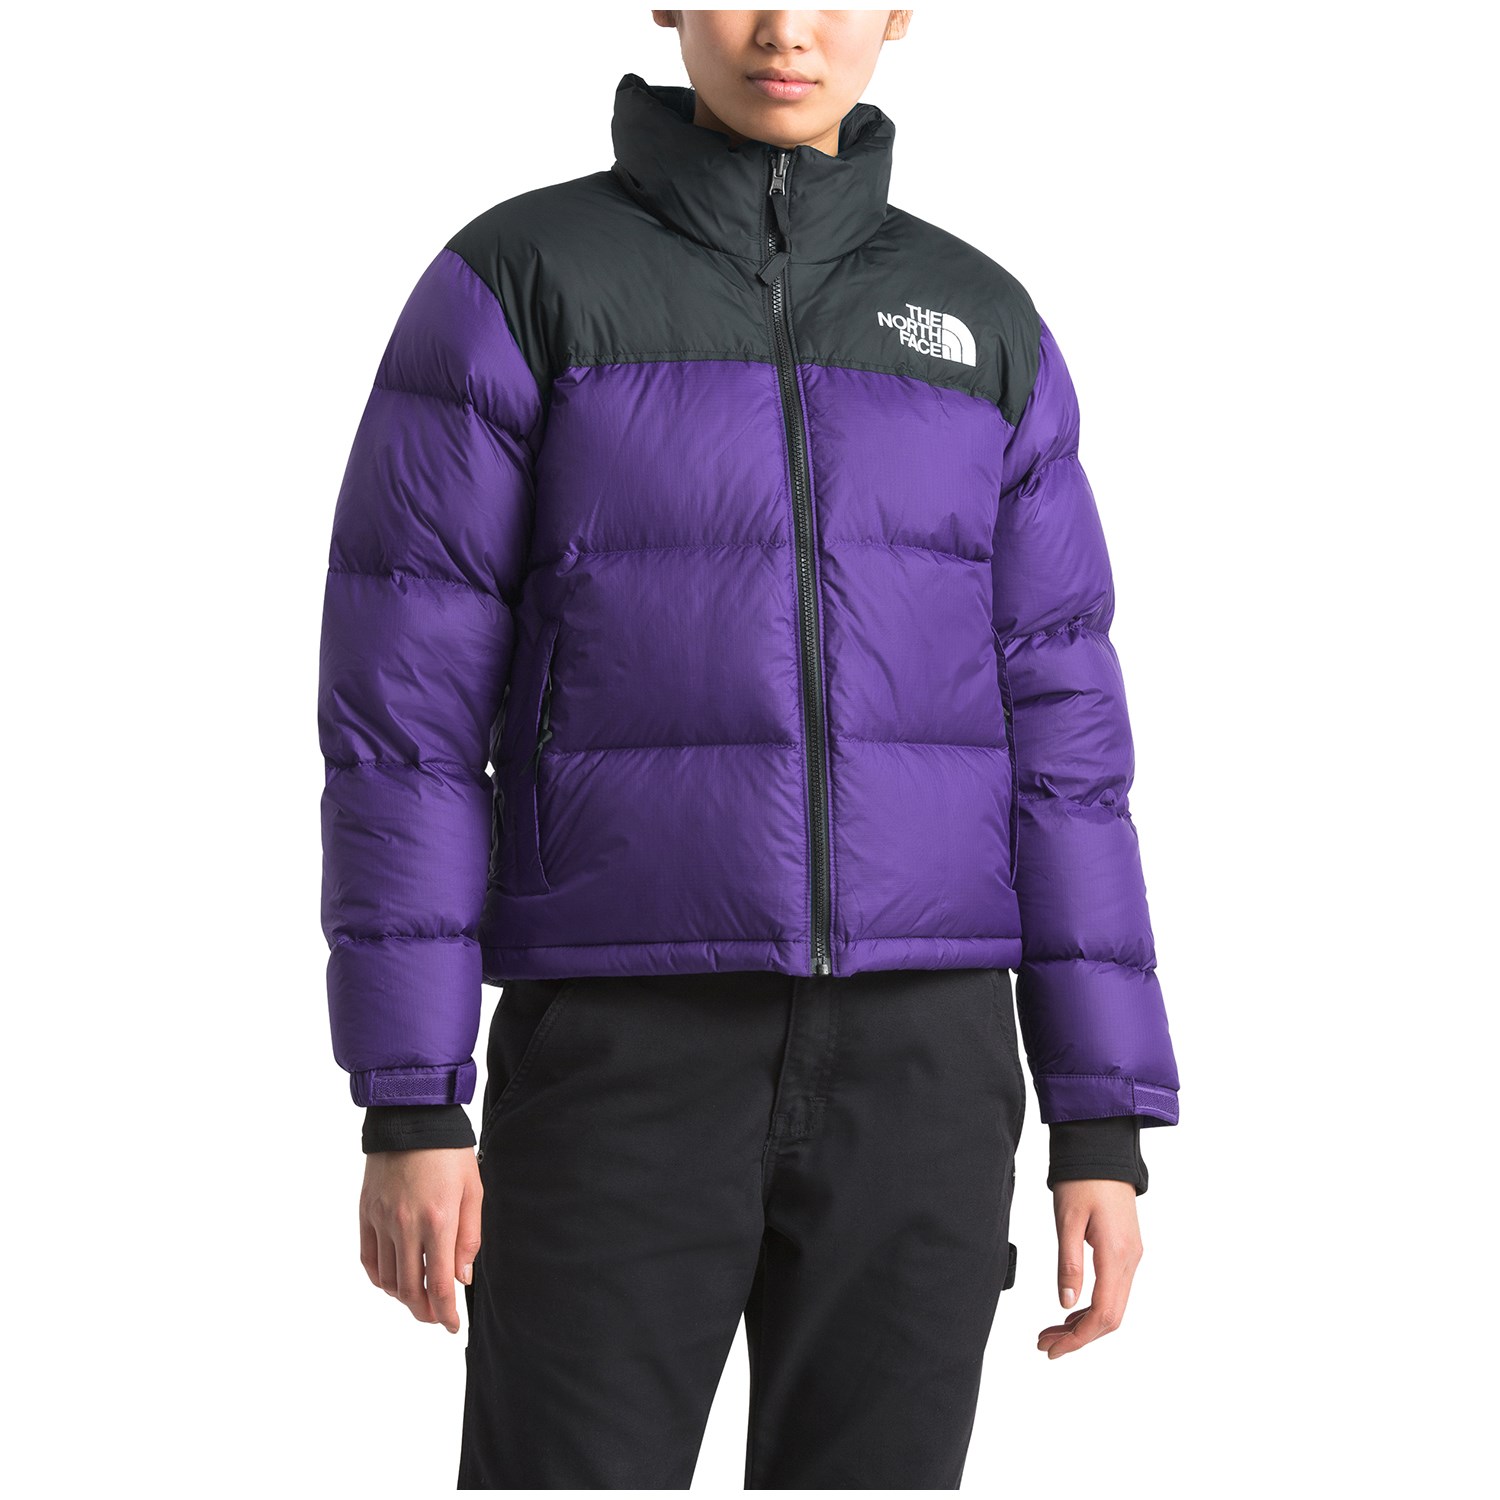 The North Face Nuptse 1996 Jacket Womens Online Shopping Has Never Been As Easy